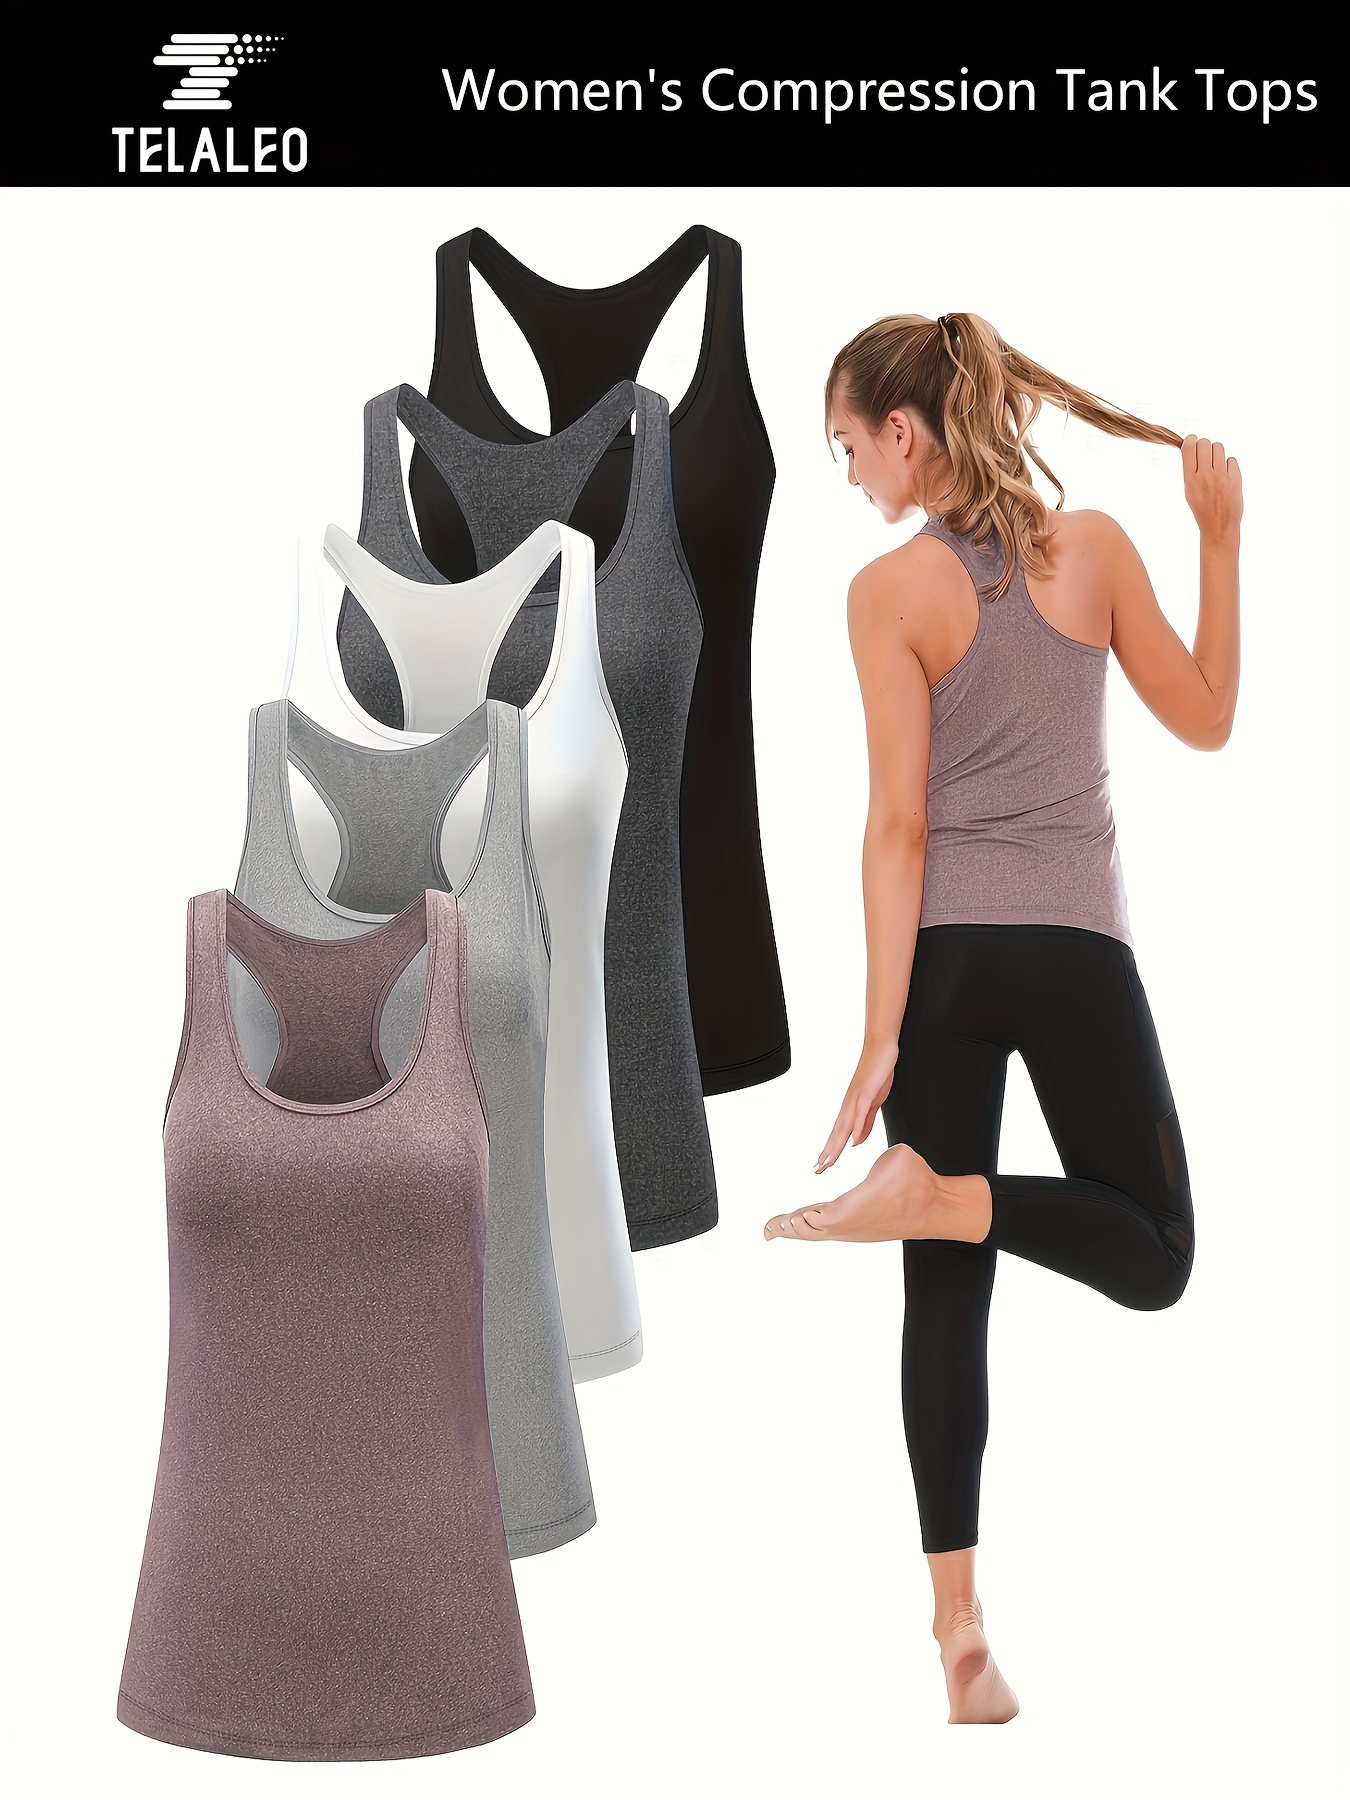 Women's Workout Tank Tops With Built In Bras, Flowy Loose Fit